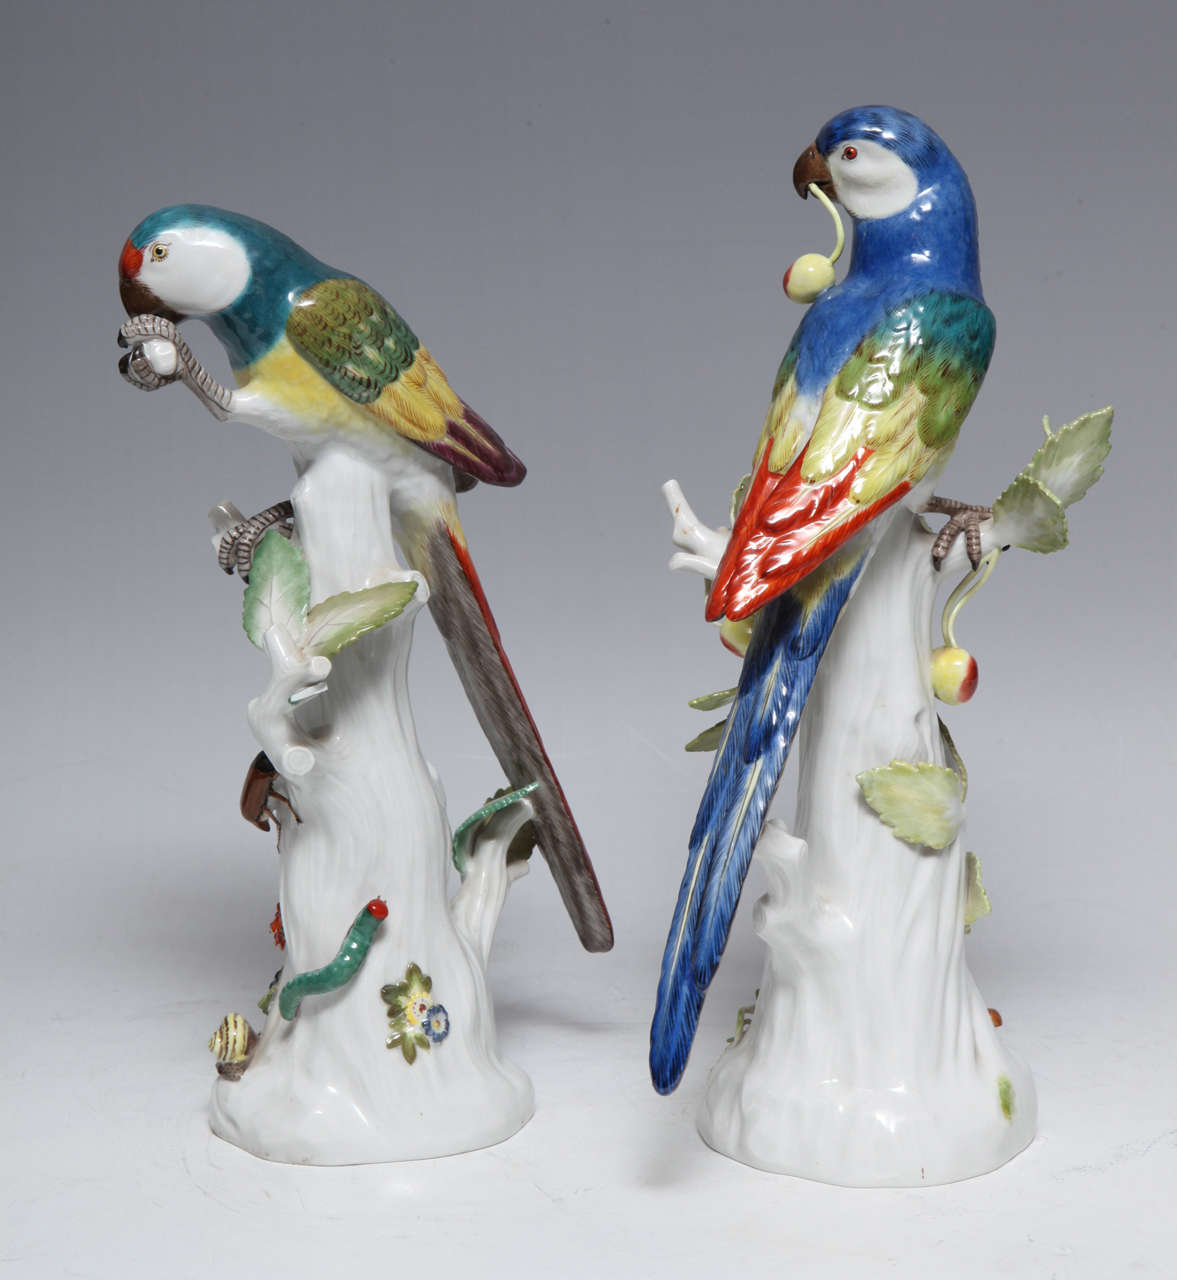 Pair of fine antique German porcelain sculptures of parrots hand painted with polychrome enamel adorned on tree stumps,19th century